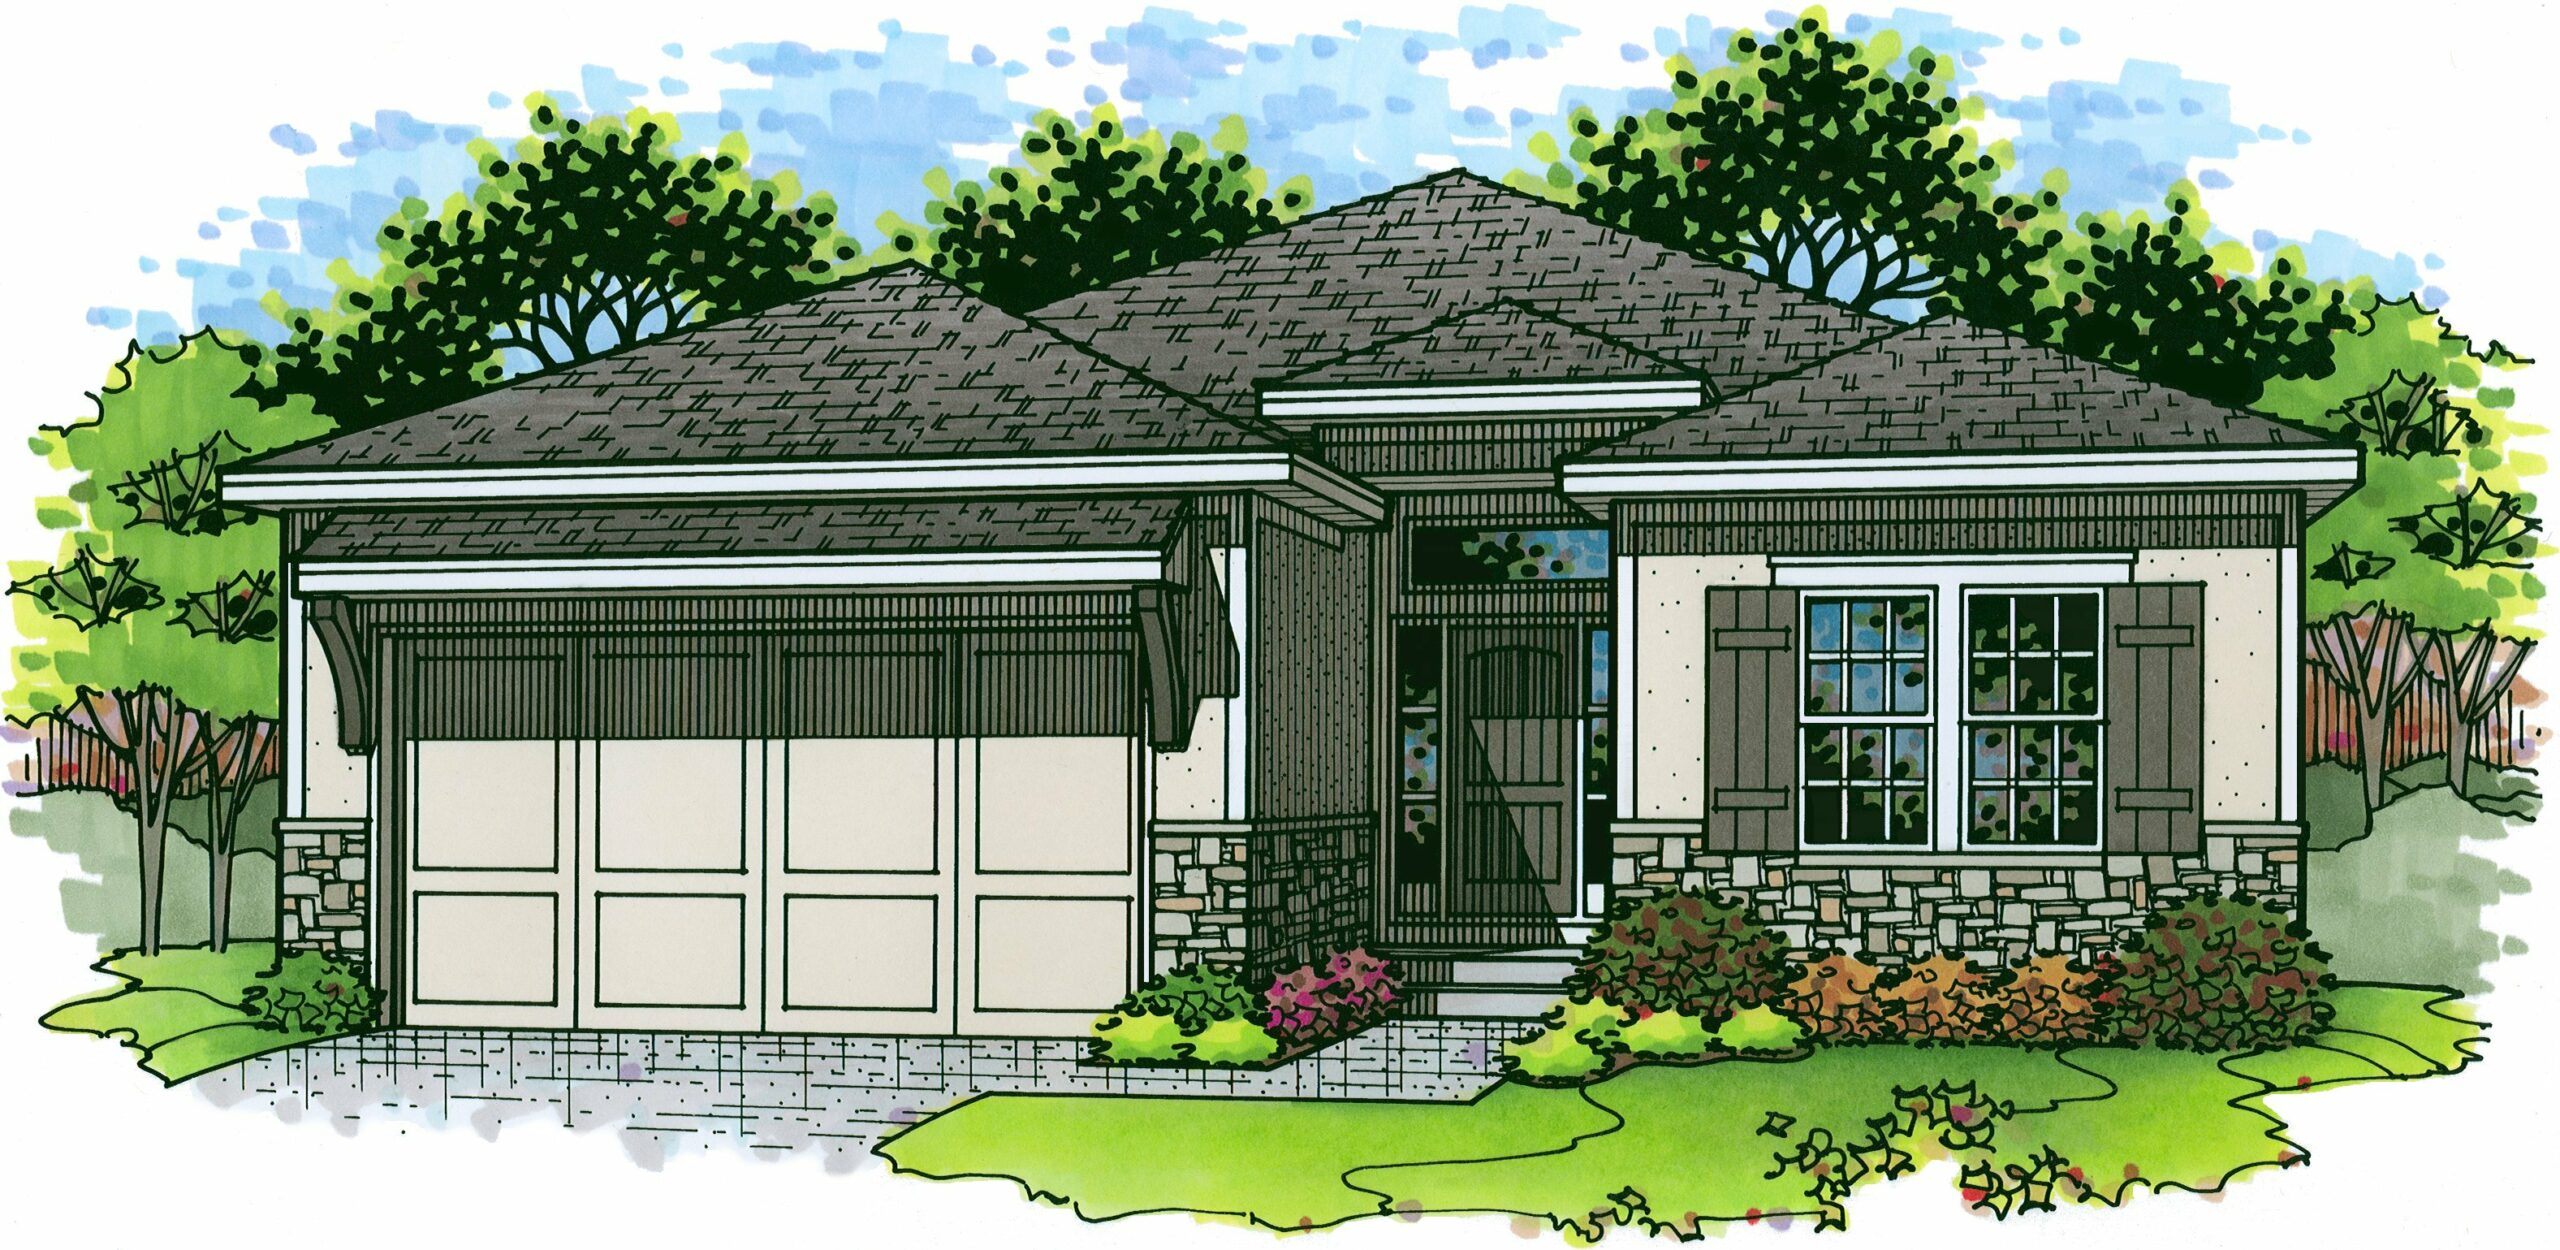 Rendering of the front elevation of the Estes model from Lambie Homes